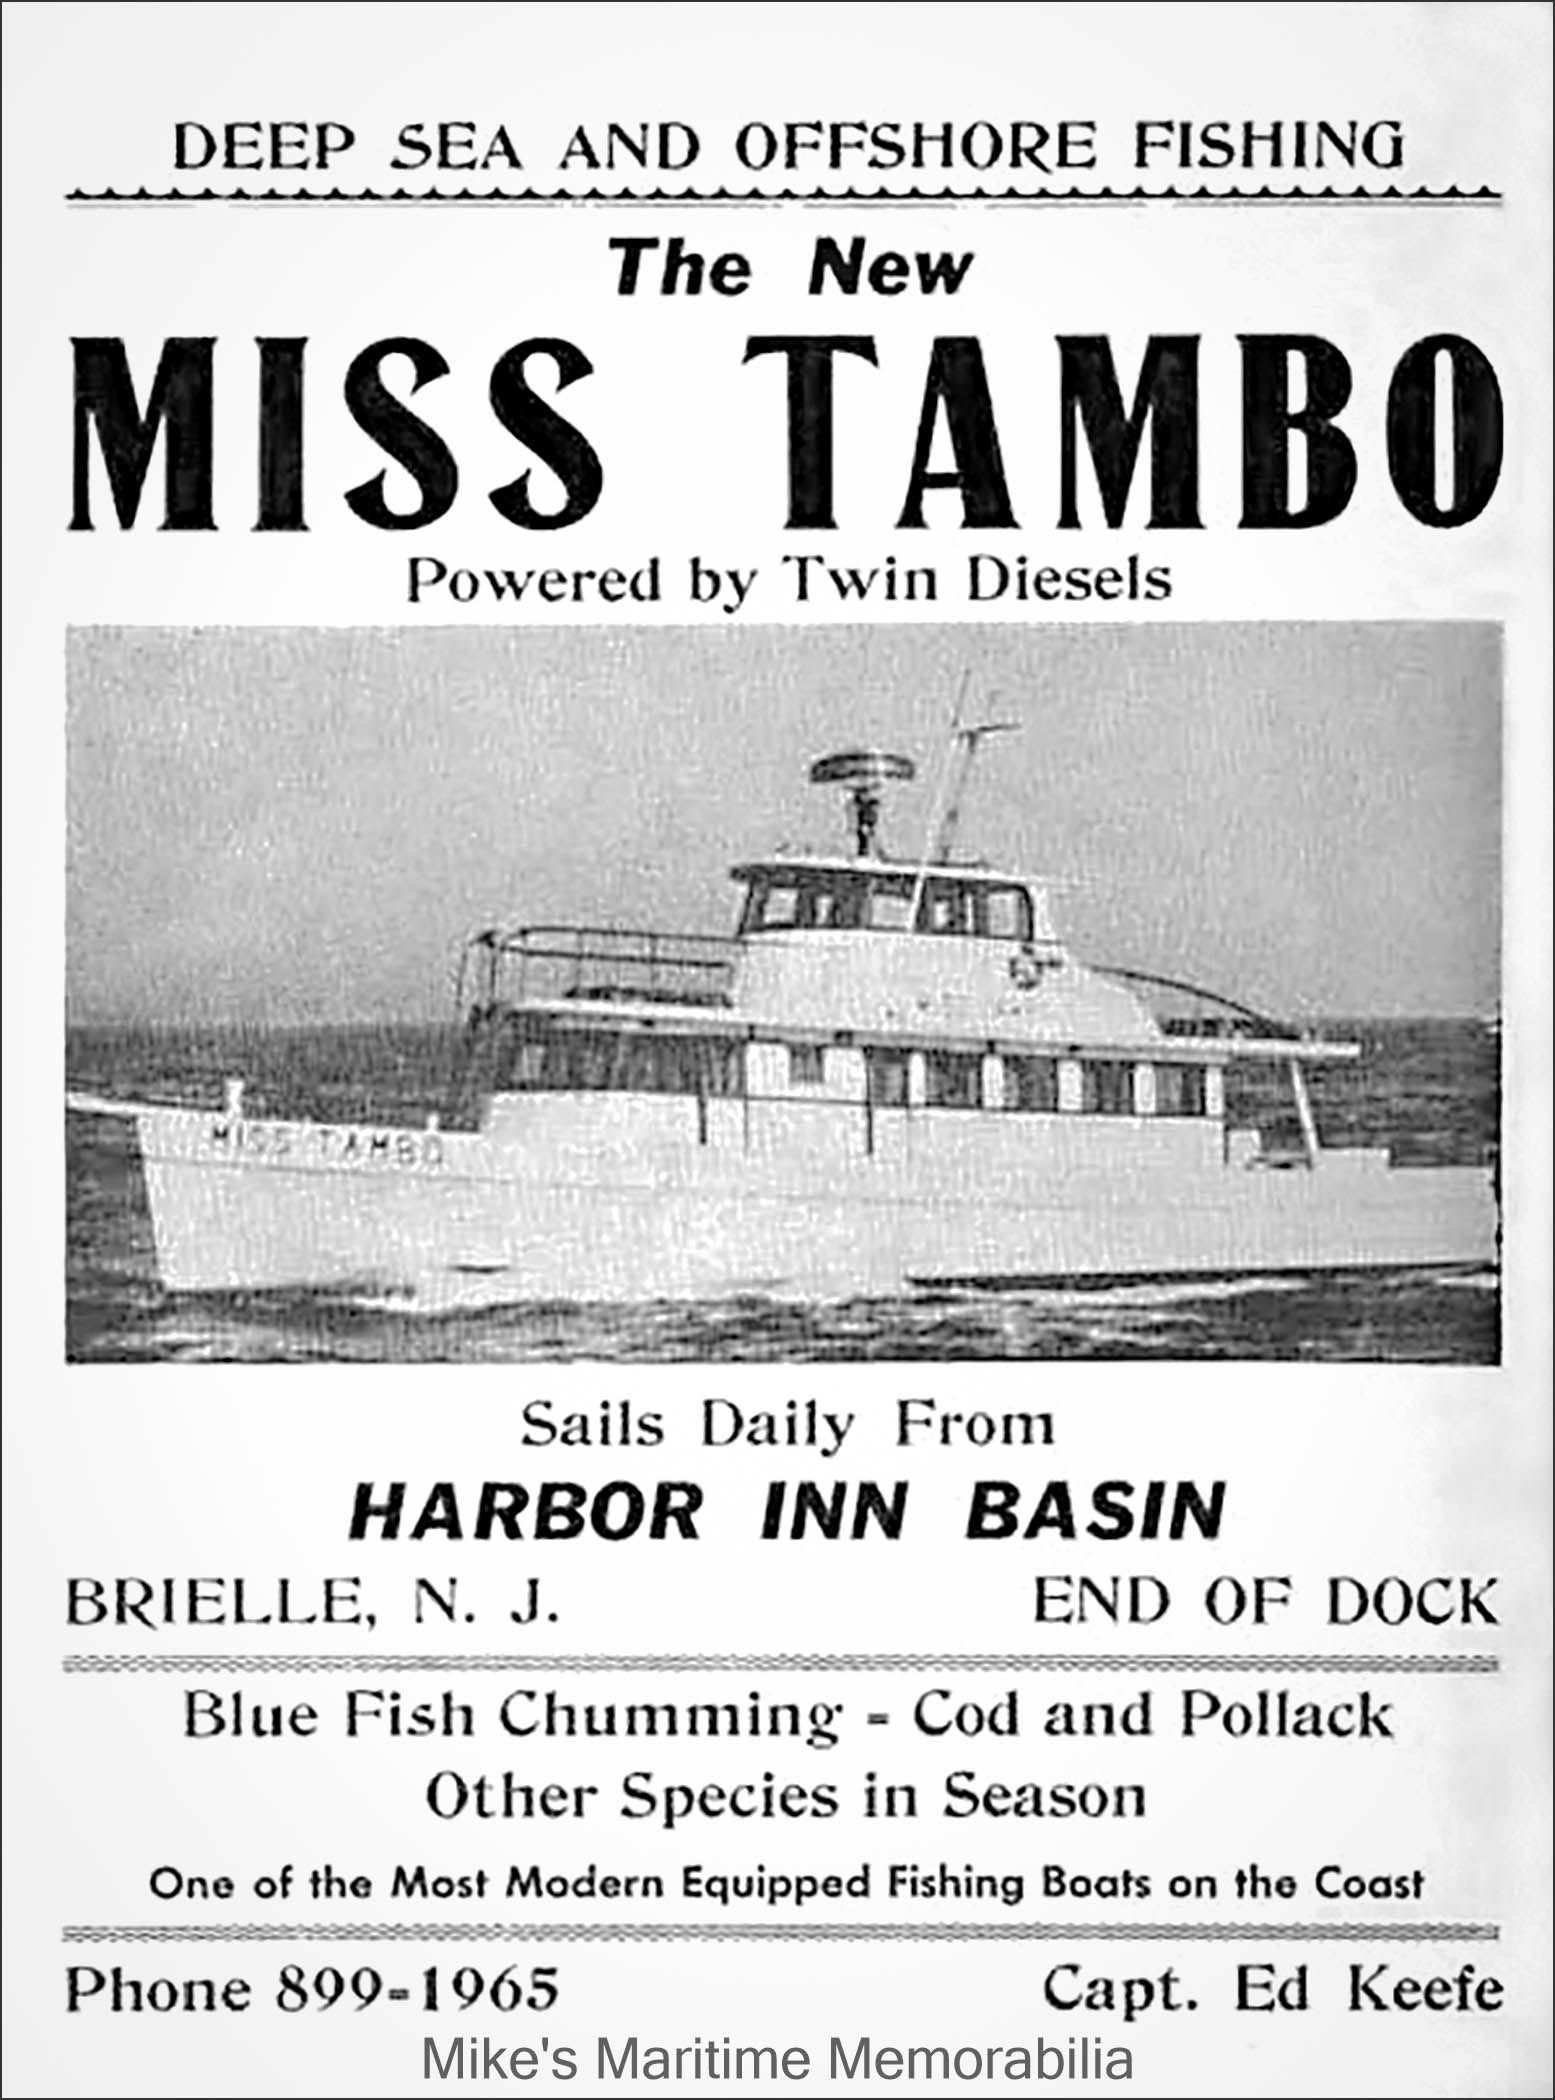 MISS TAMBO Poster, Brielle, NJ – 1962 A poster for Captain Ed Keefe's "MISS TAMBO" from the Harbor Inn Basin, Brielle, NJ circa 1962. Posters were a popular way of advertising at the time and you could find them lining the walls of every bait & tackle shop. The poster is courtesy of Ed Keefe Jr.